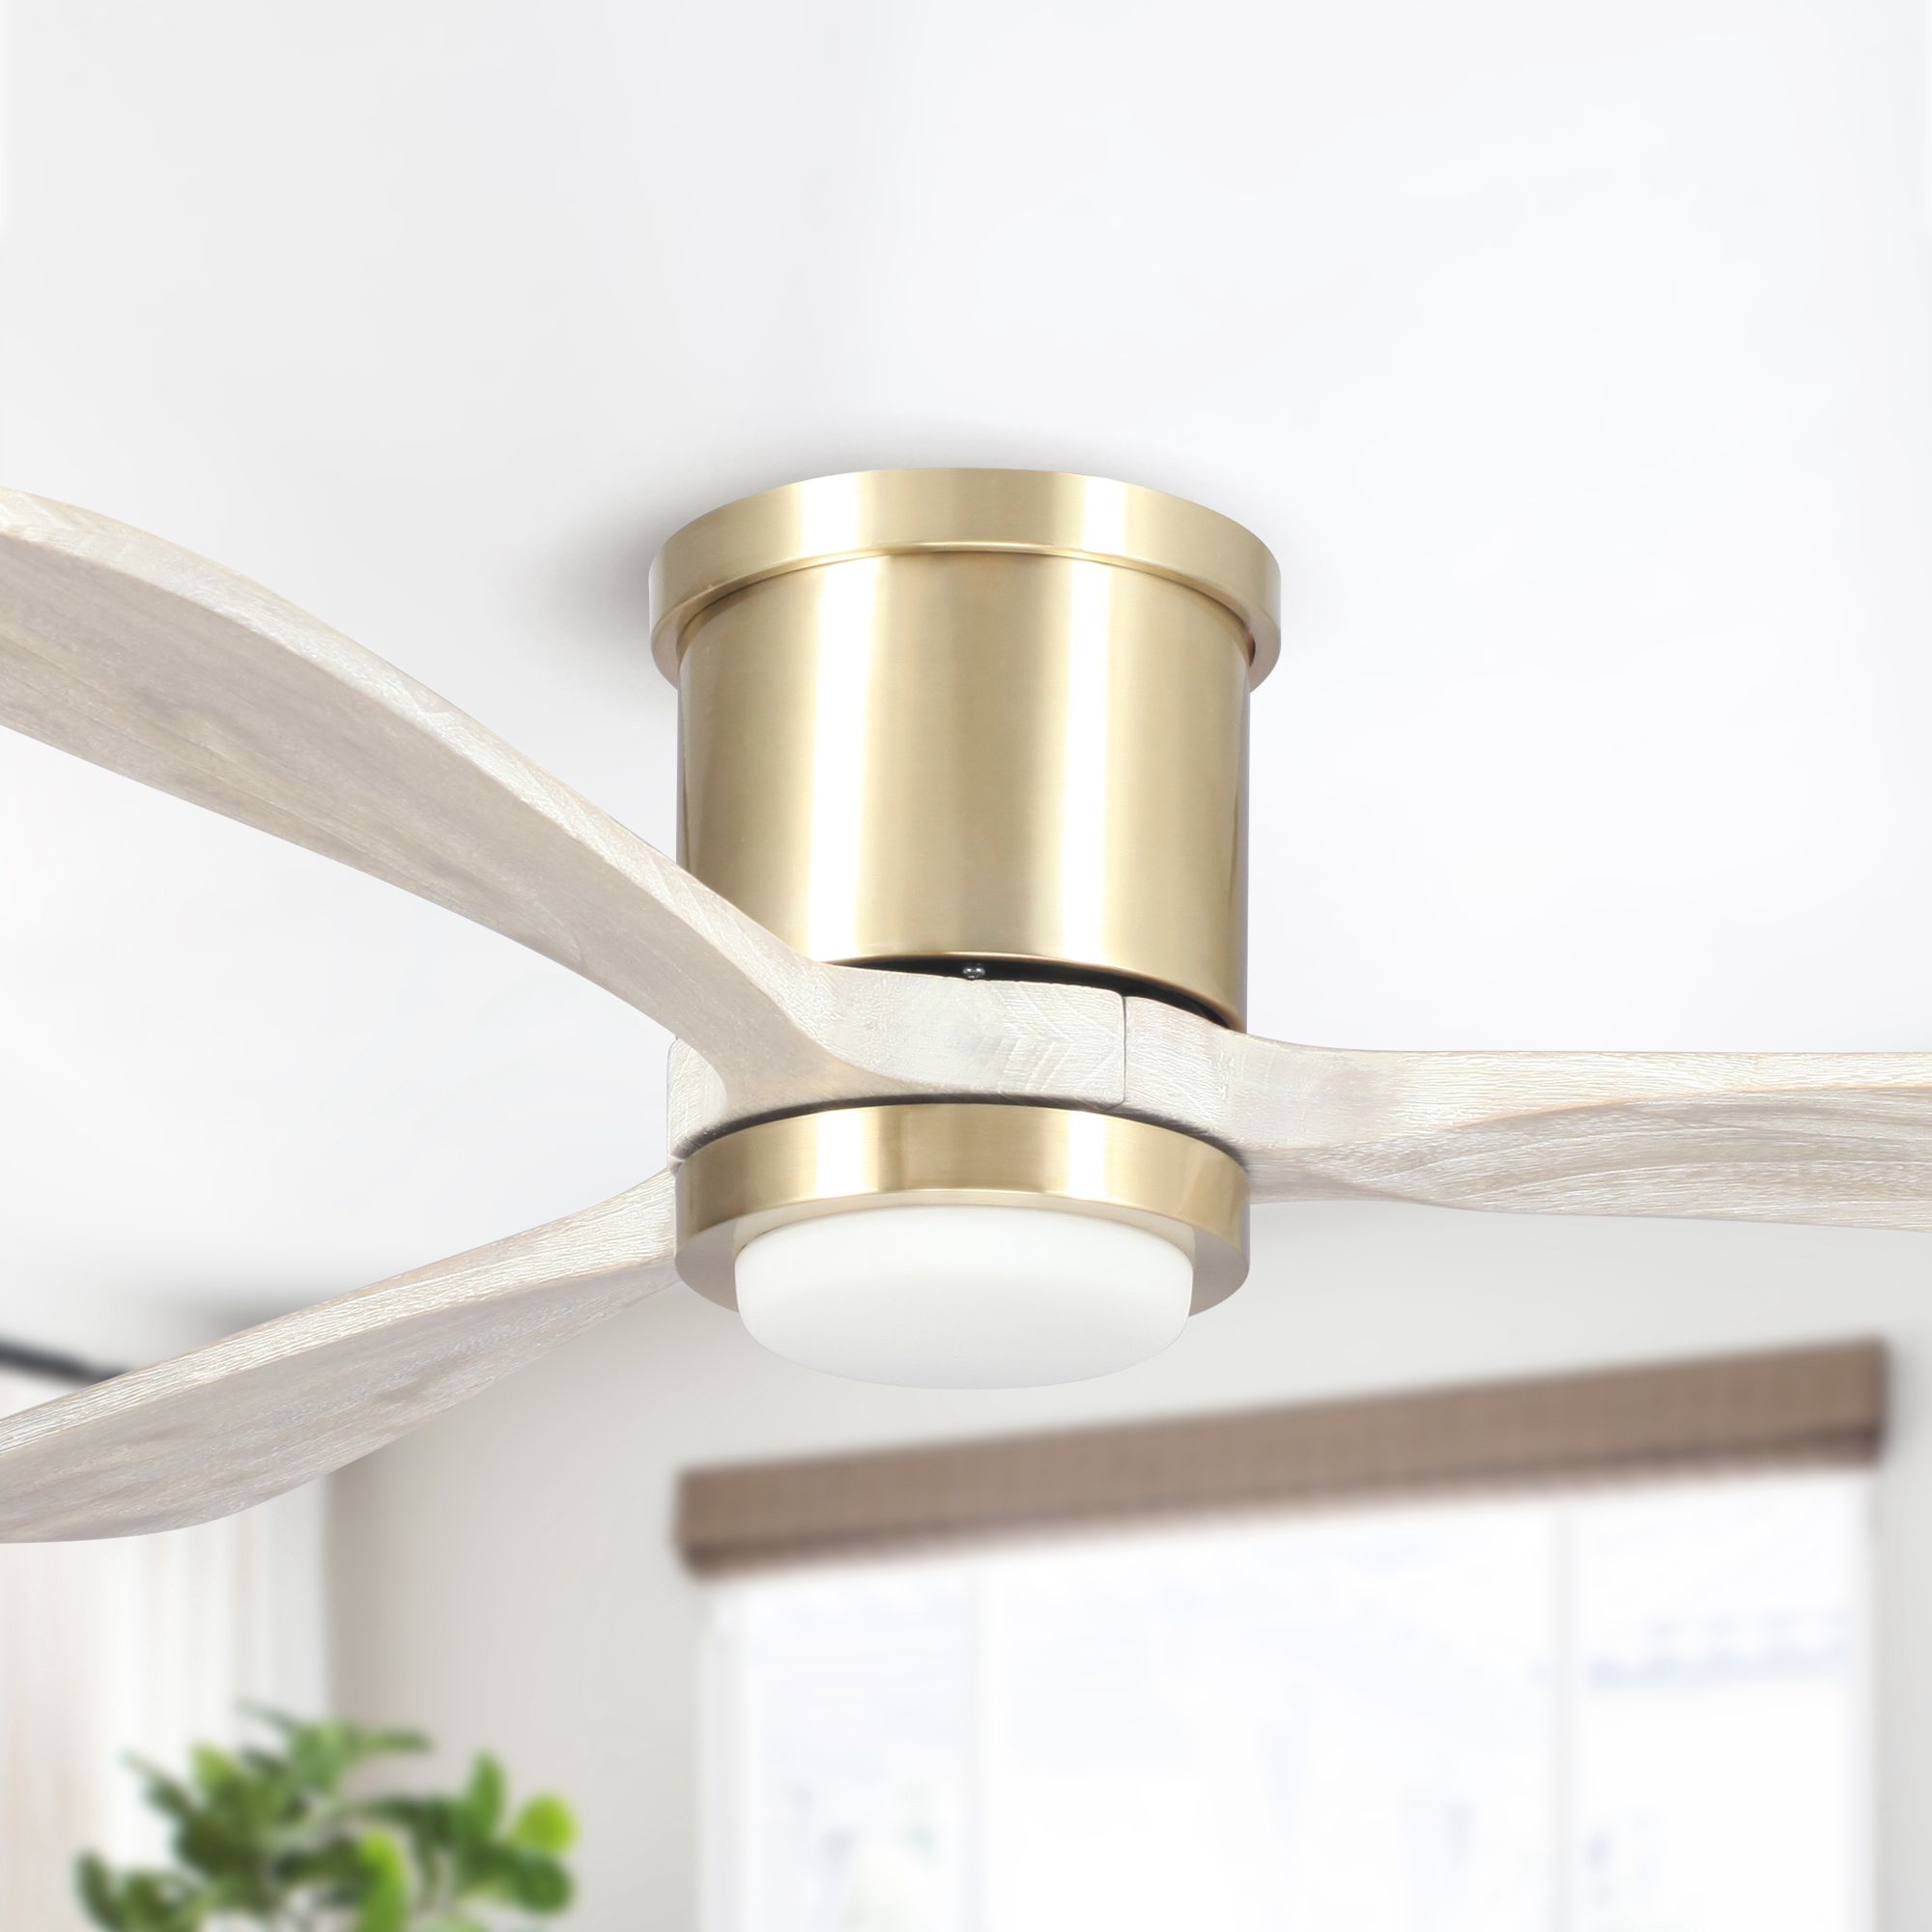 Low Profile Ceiling Fan with Lights 52 Inch Modern Flush Mount Ceiling Fan with Remote Control, Pale Gold - image 4 of 7